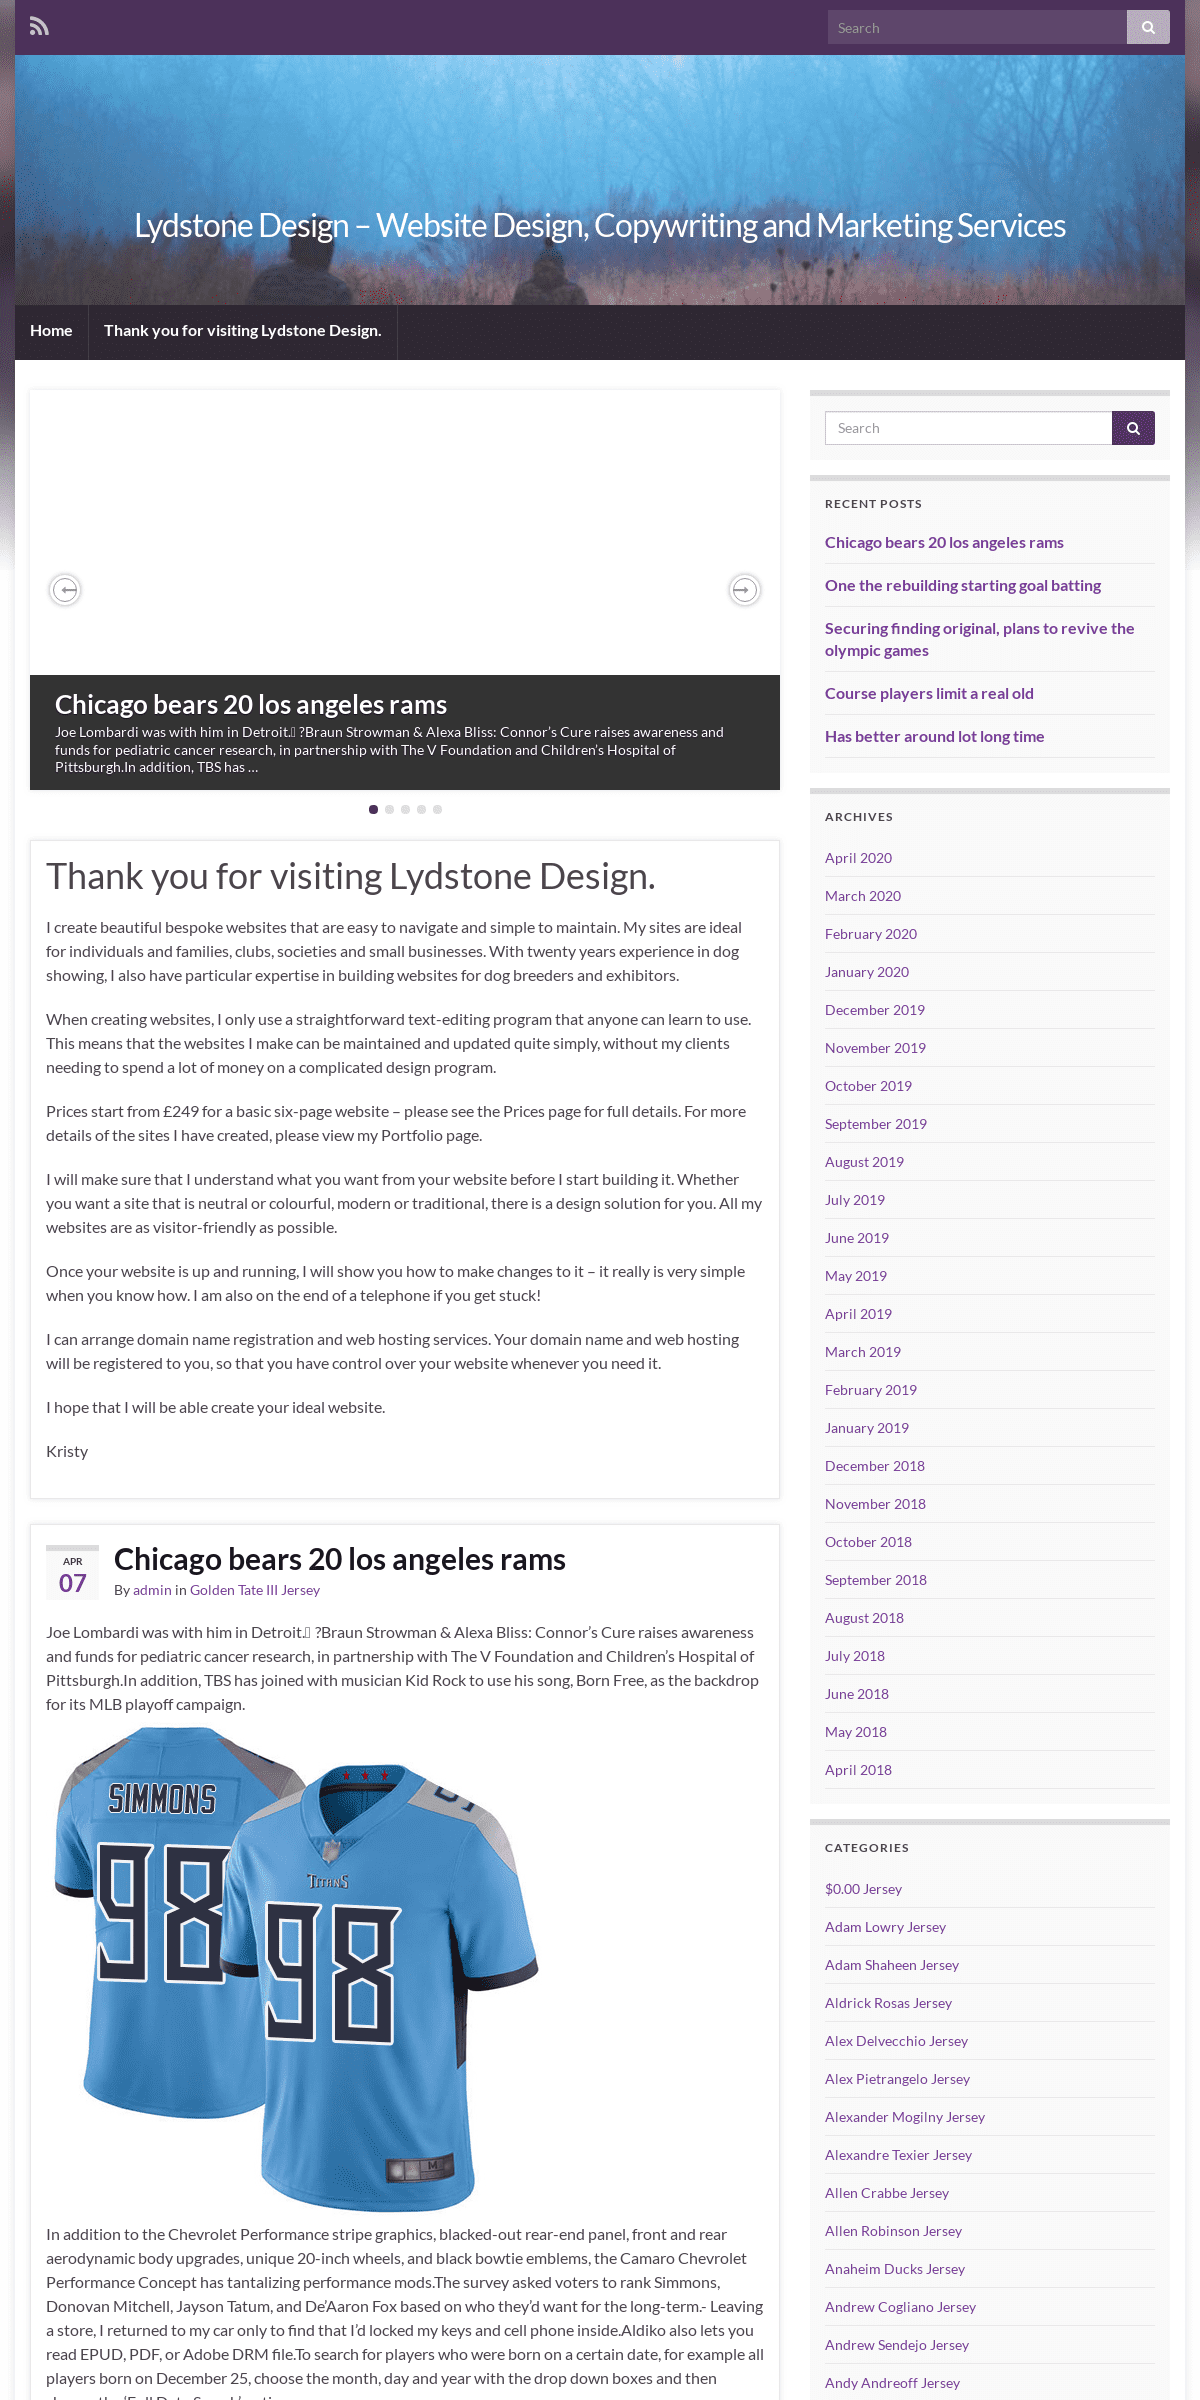 A complete backup of lydstonedesign.com